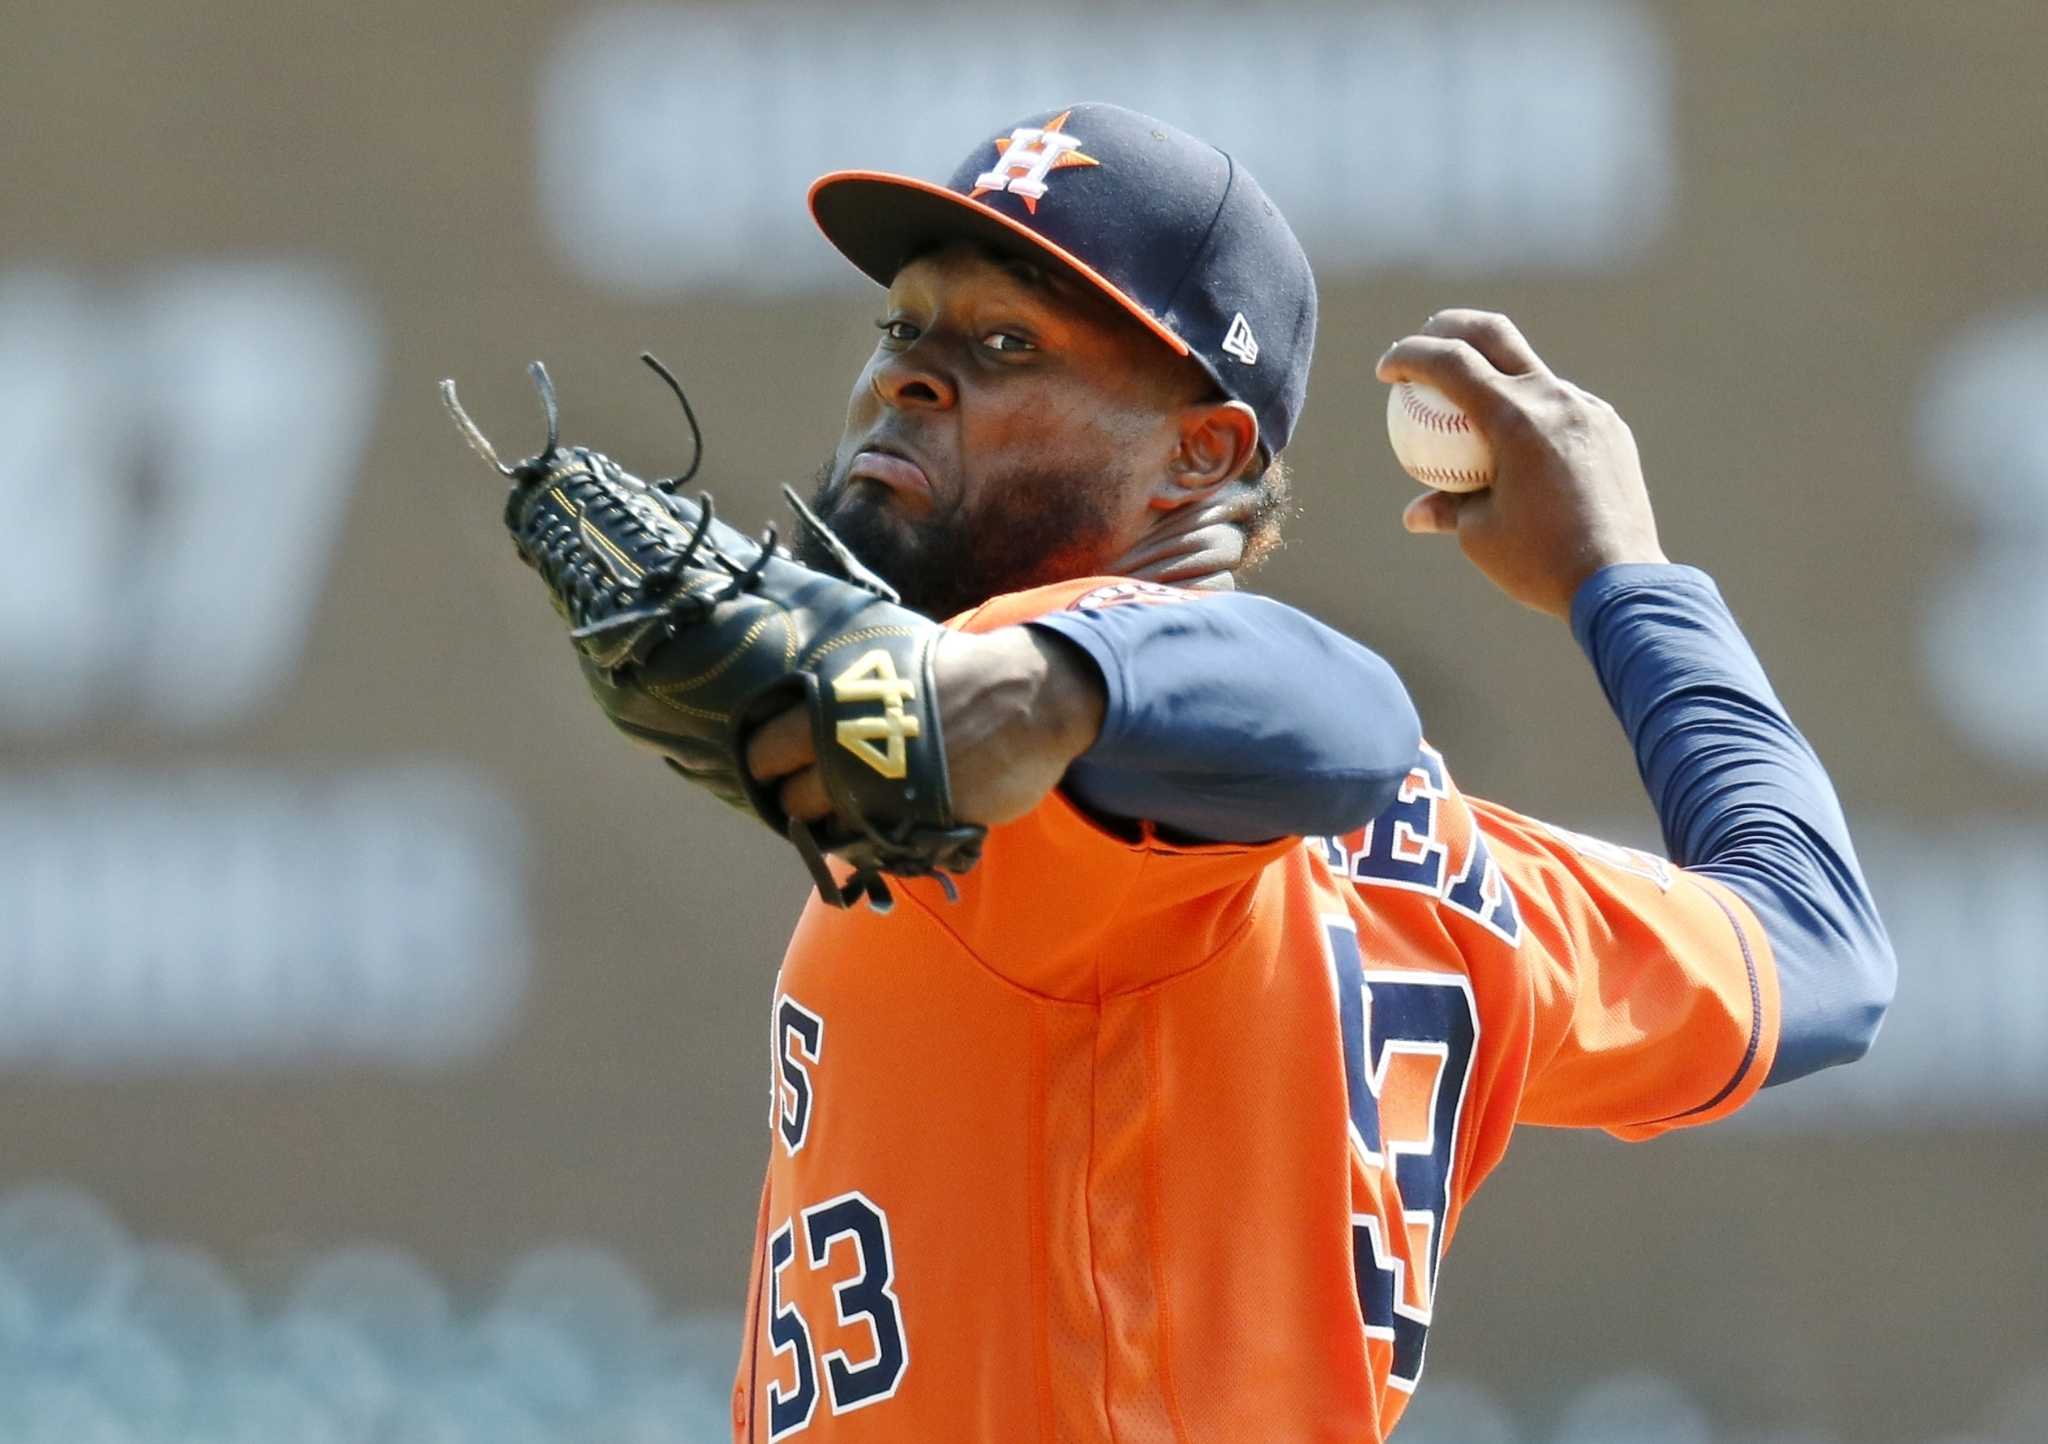 Hunter Brown leads Astros to win over Tigers in Detroit homecoming